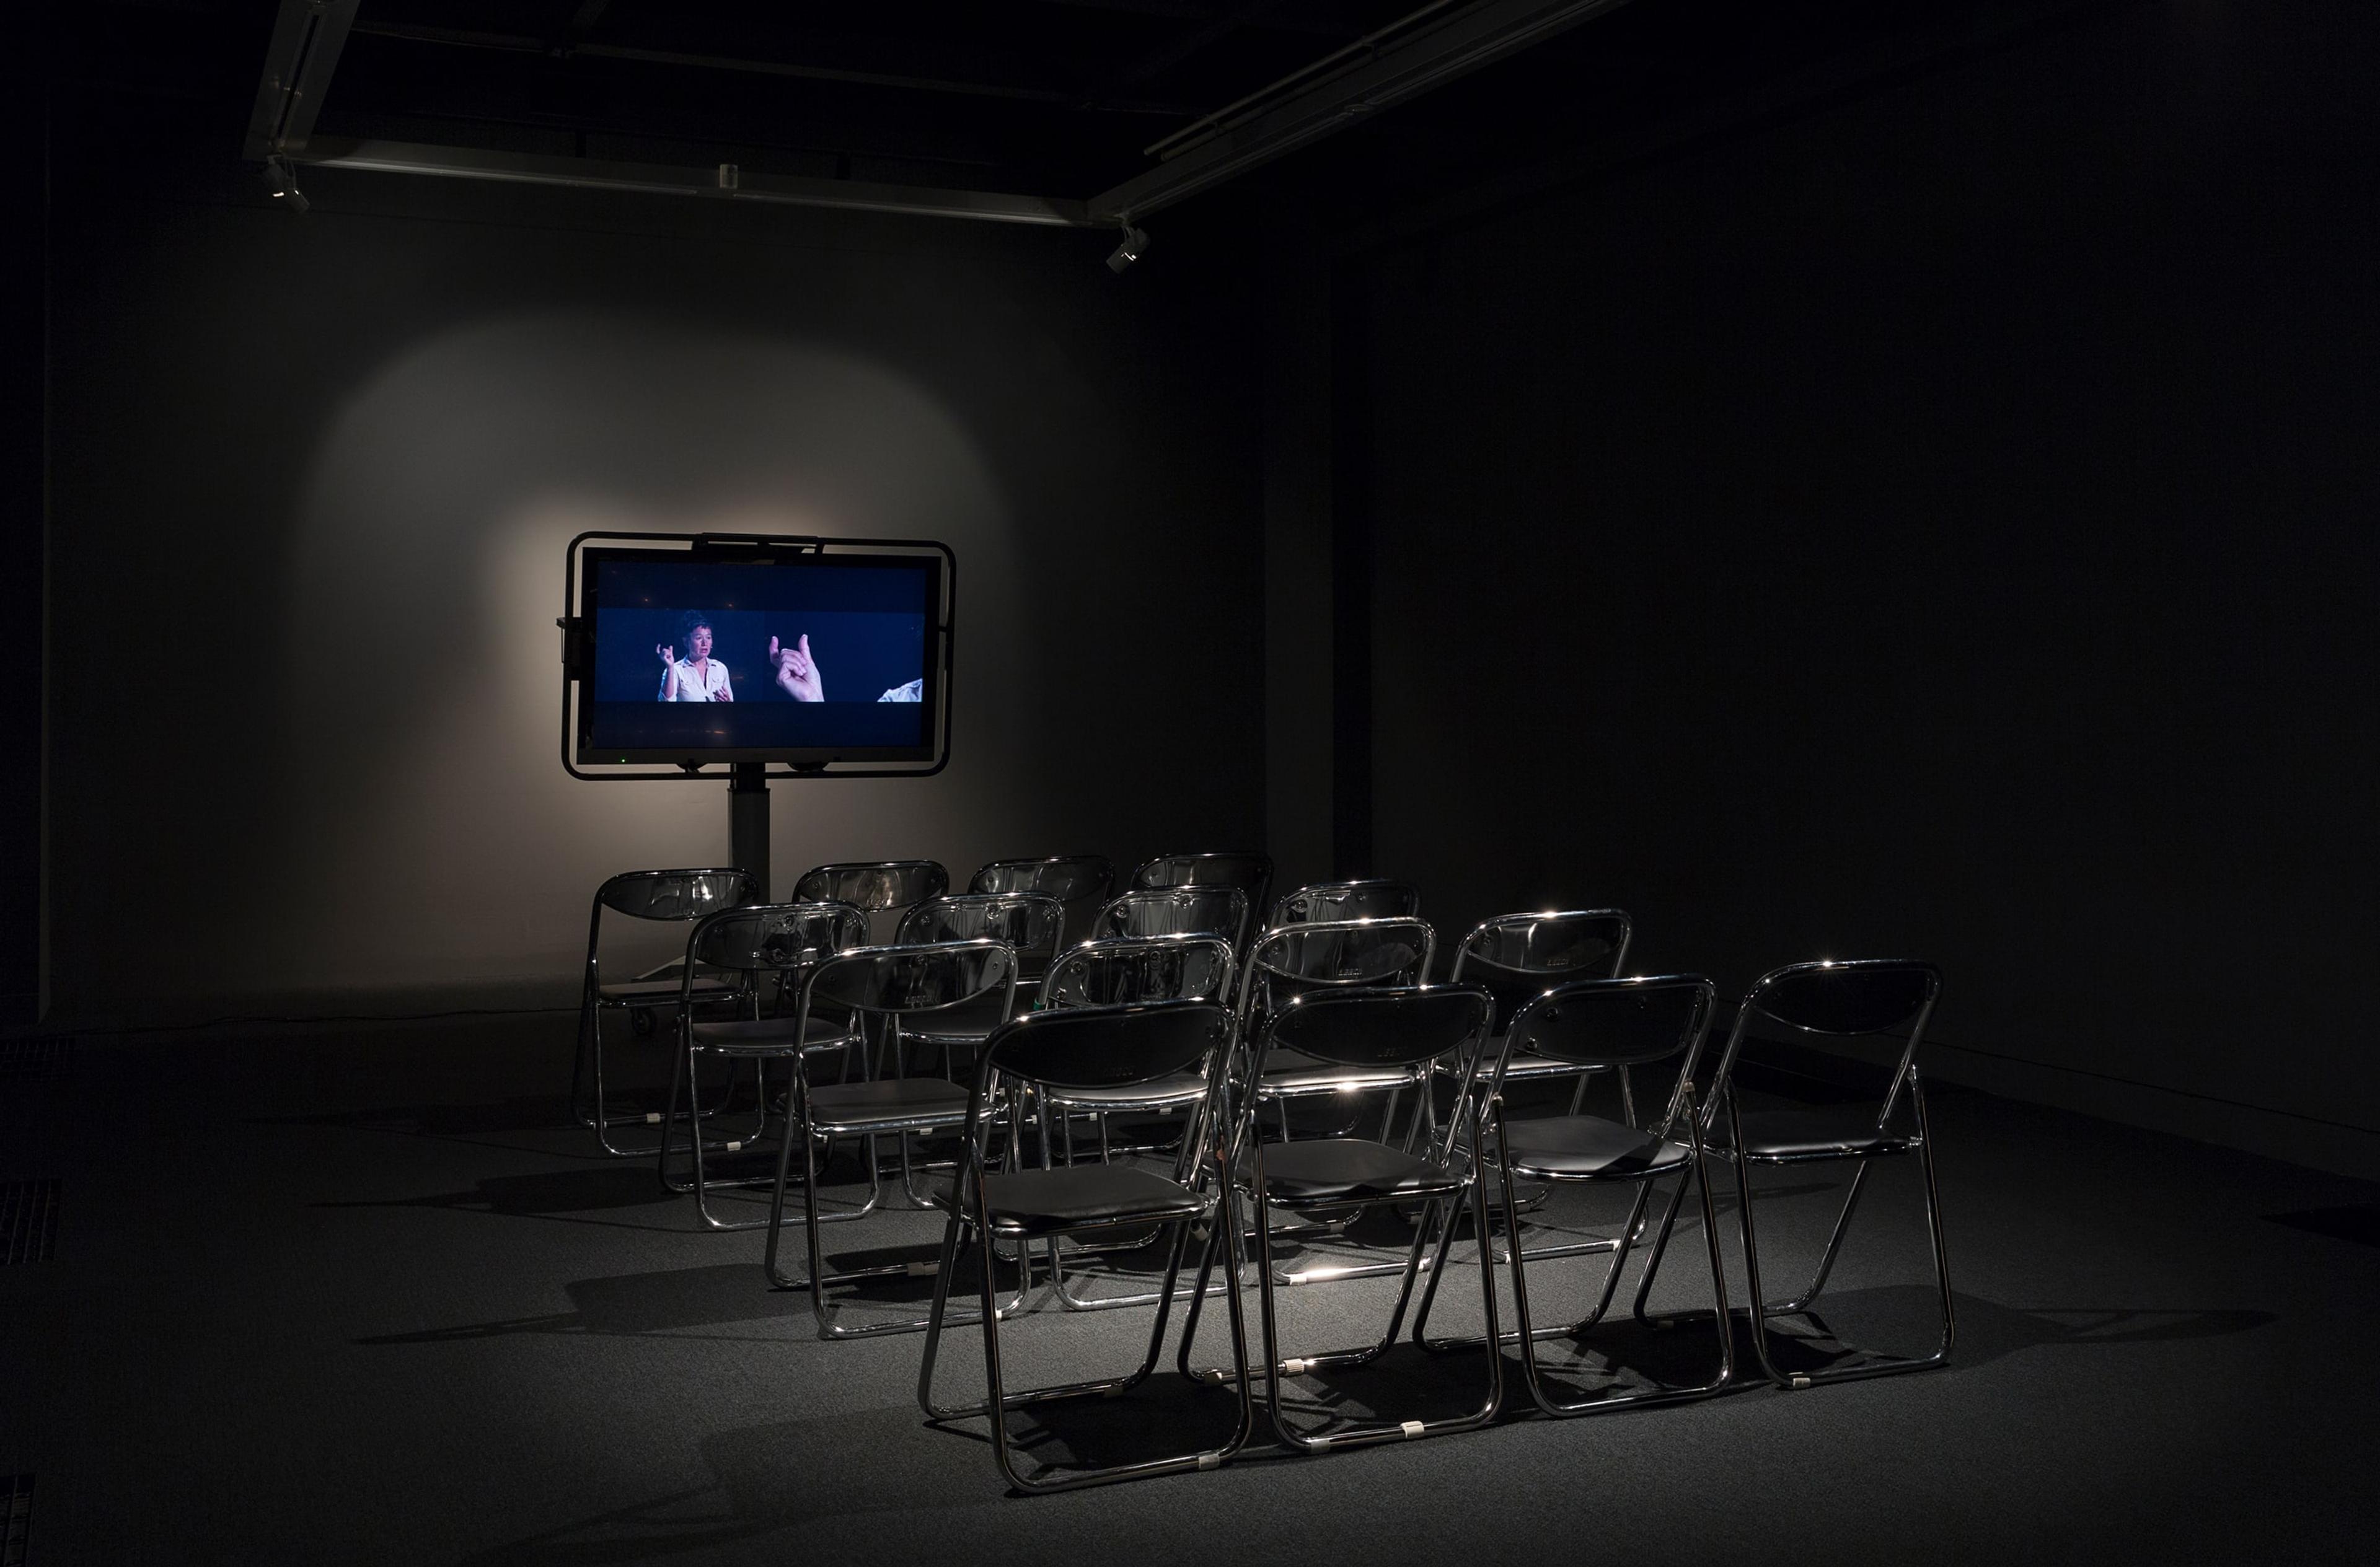 Hito Steyerl, Is a Museum a Battlefield? 2013/2014, installation view at the Adam Art Gallery, © Hito Steyerl (photo: Shaun Waugh)